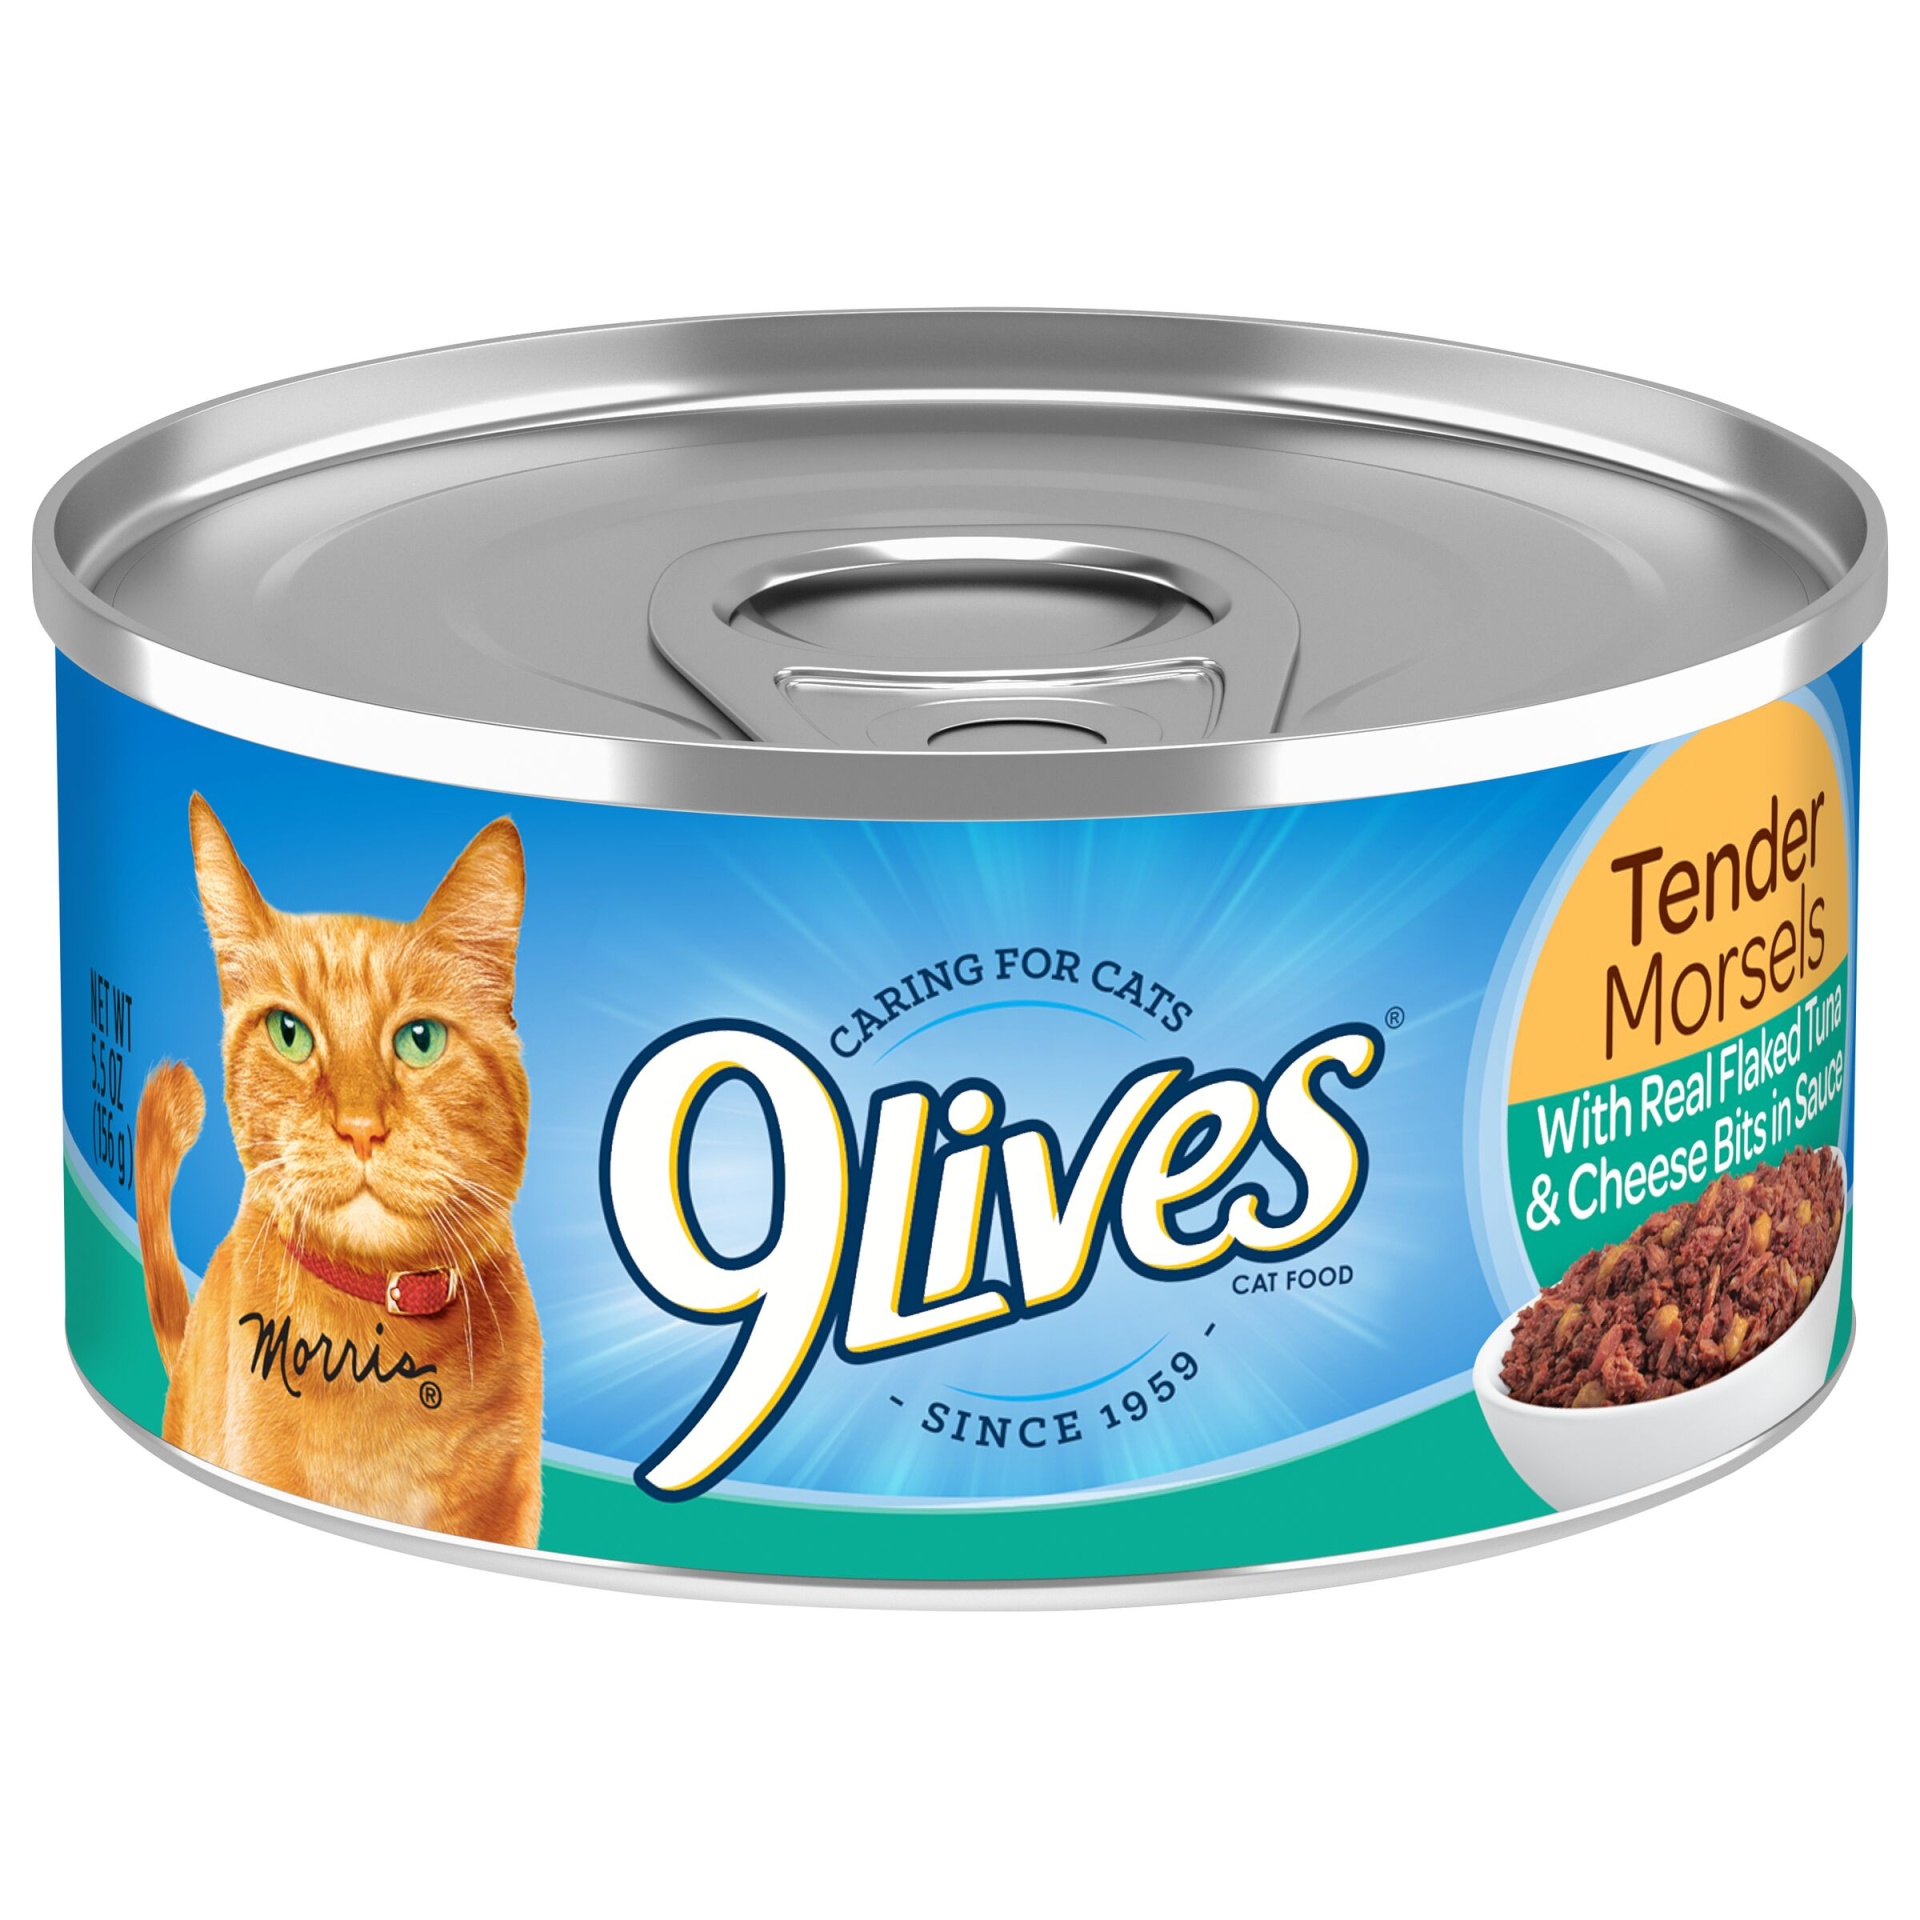 slide 1 of 1, 9Lives Cat Food, with Real Flaked Tuna & Cheese Bits in Sauce, Tender Morsels, 4 ct; 5.5 oz